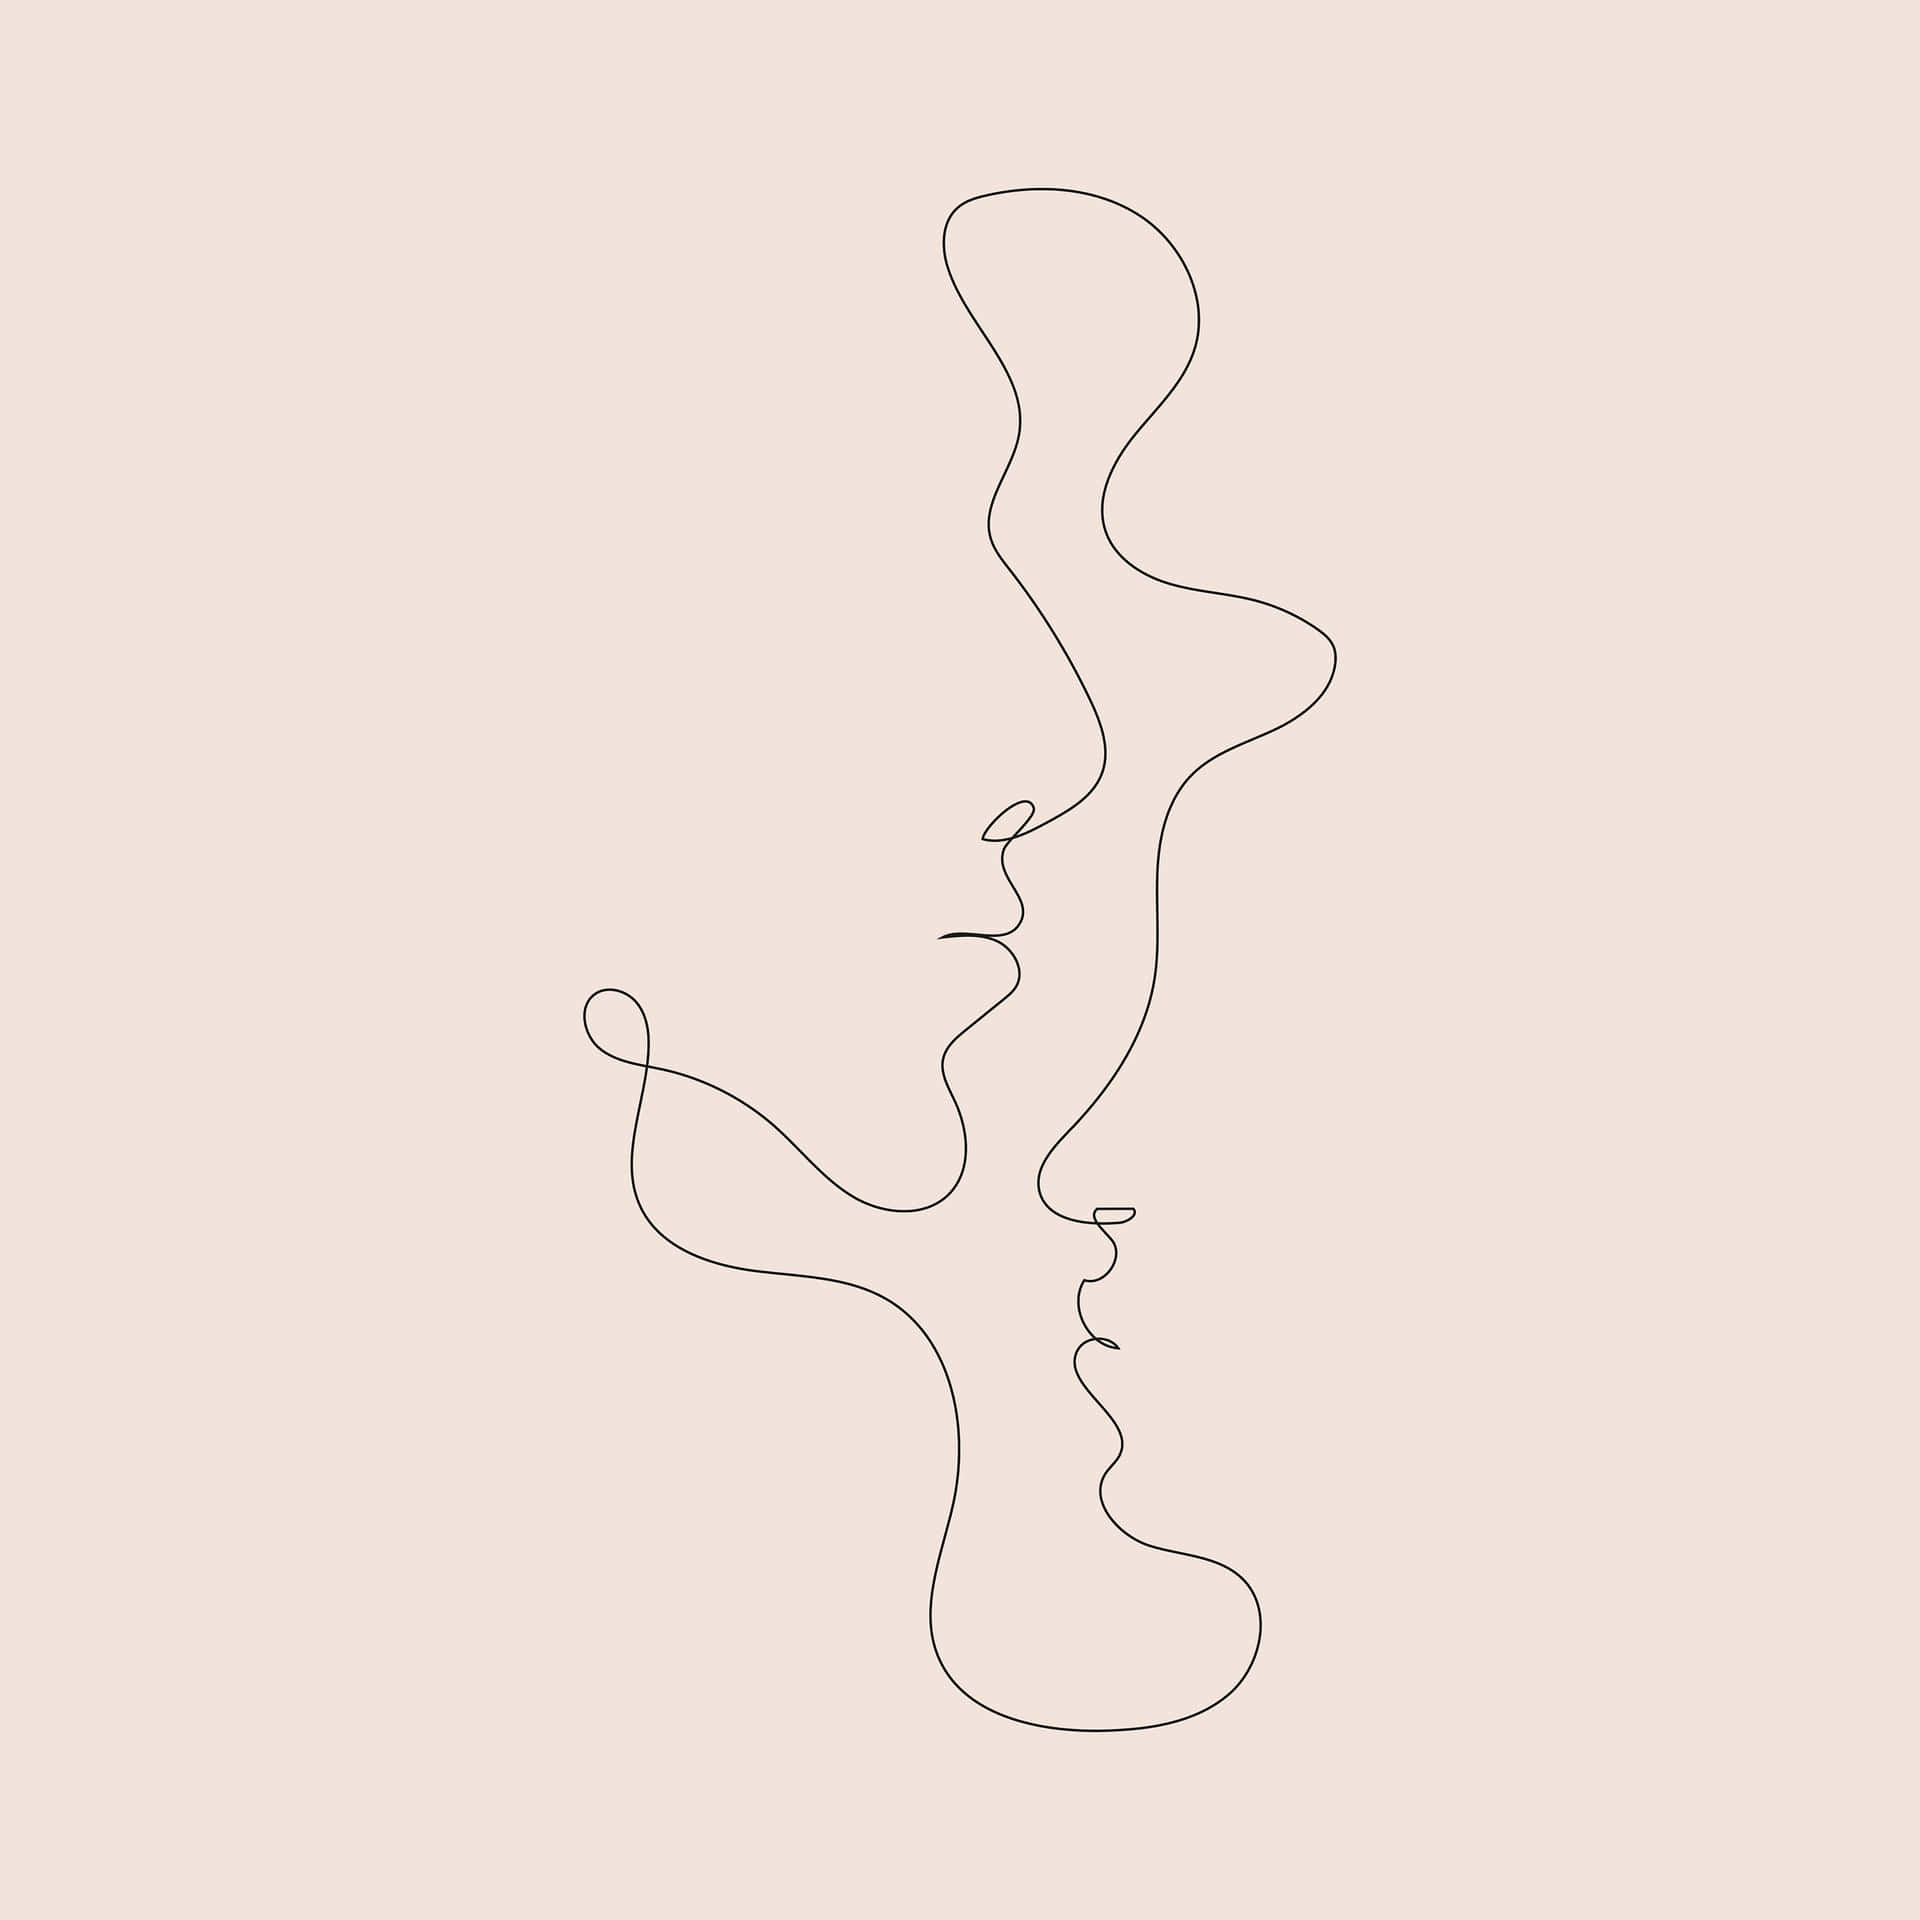 A Line Drawing Of A Woman's Face Wallpaper